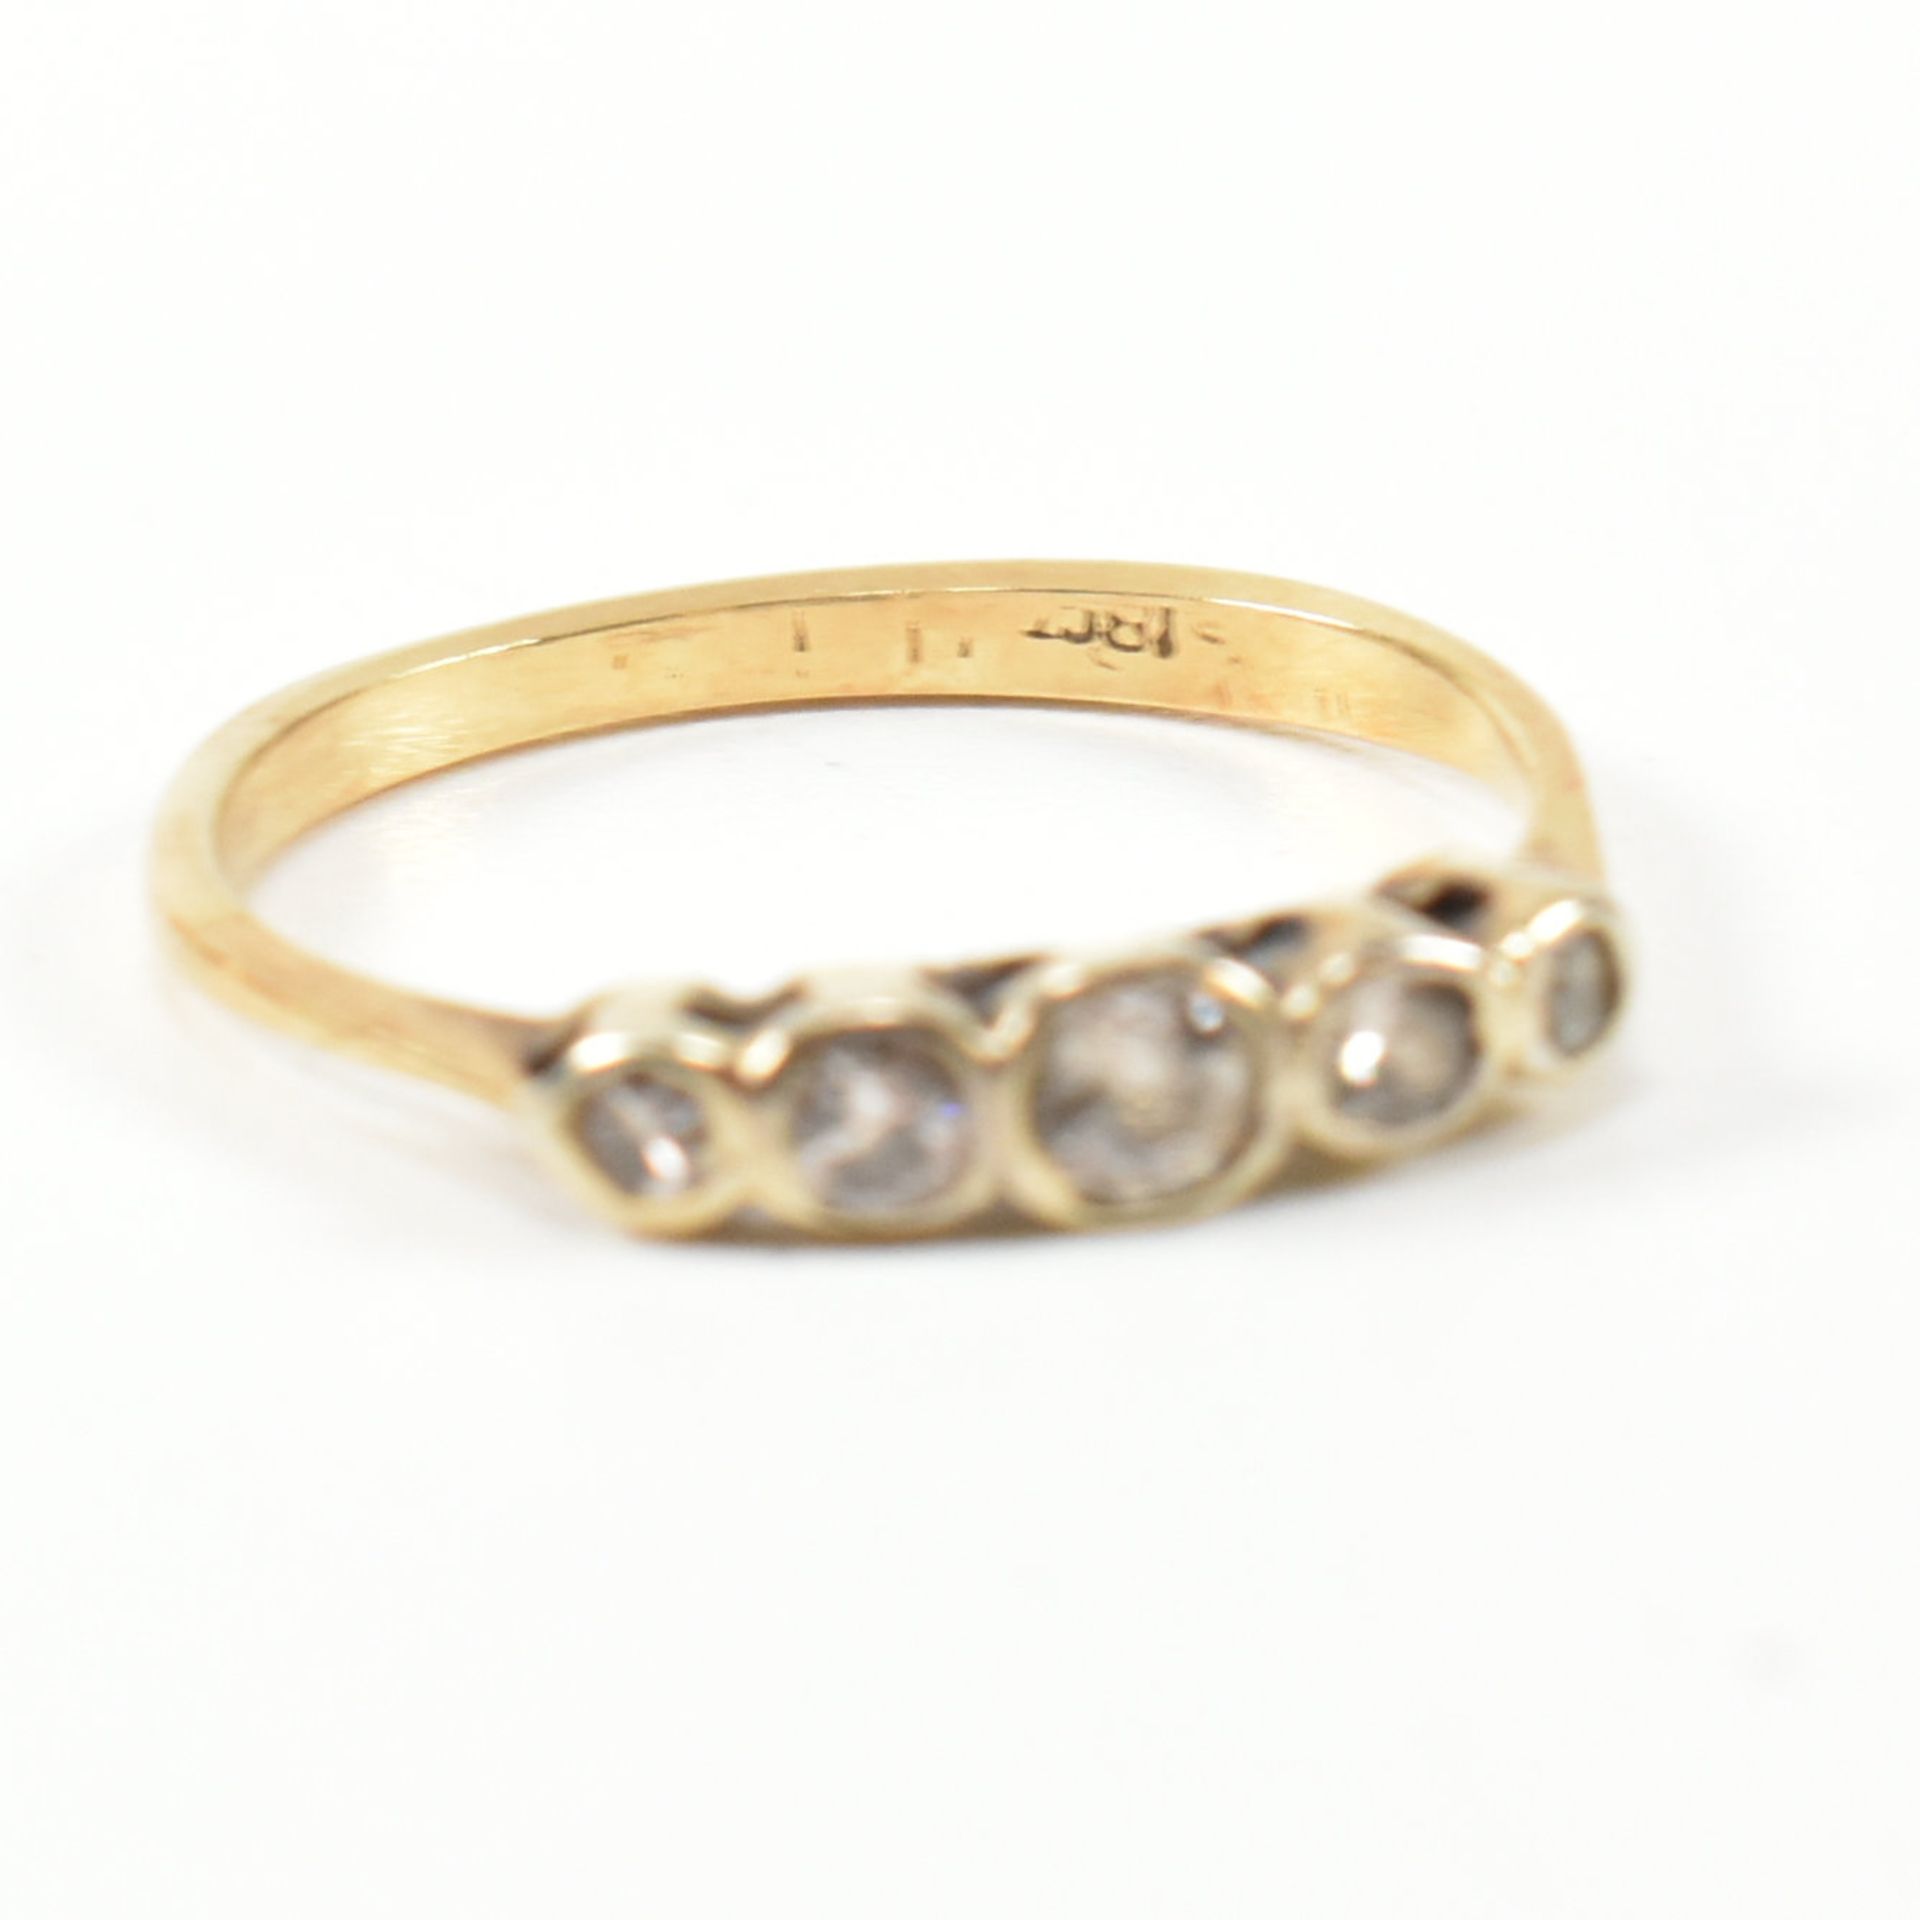 TWO 18CT GOLD & DIAMOND RINGS - Image 7 of 8